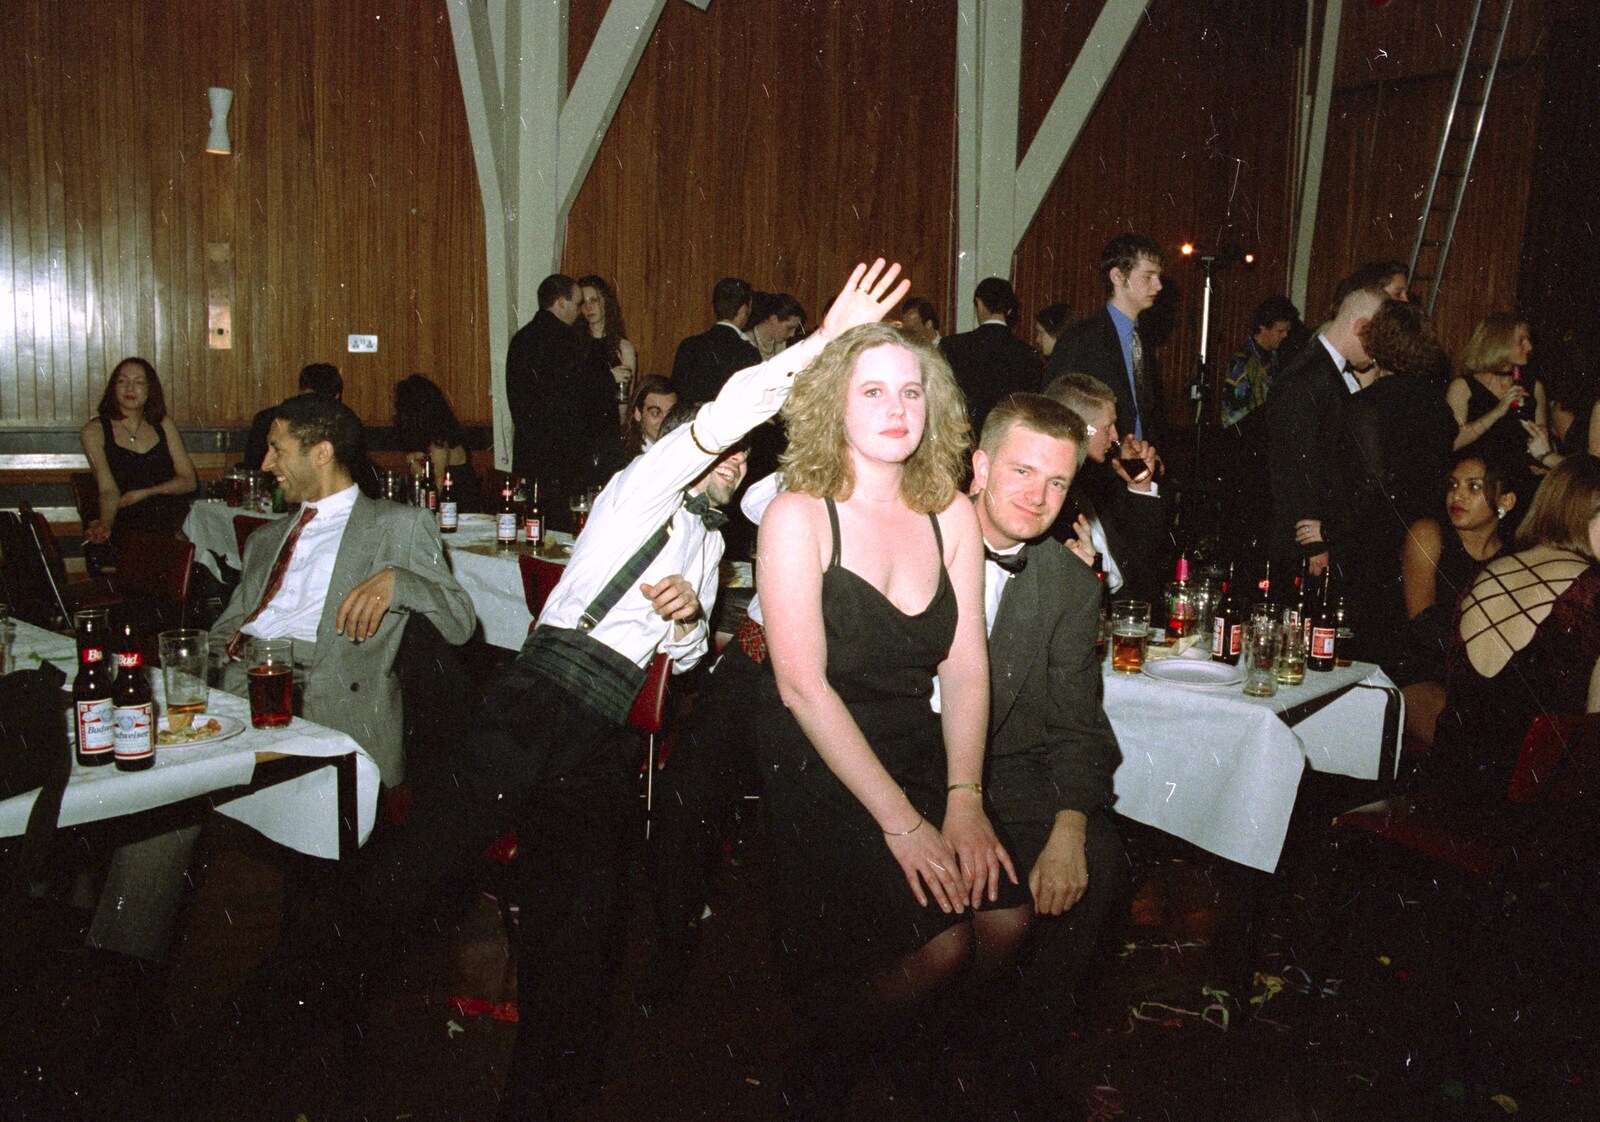 Nosher and a random friend of Trev's from CISU at the Suffolk College May Ball, Ipswich, Suffolk - 11th May 1997